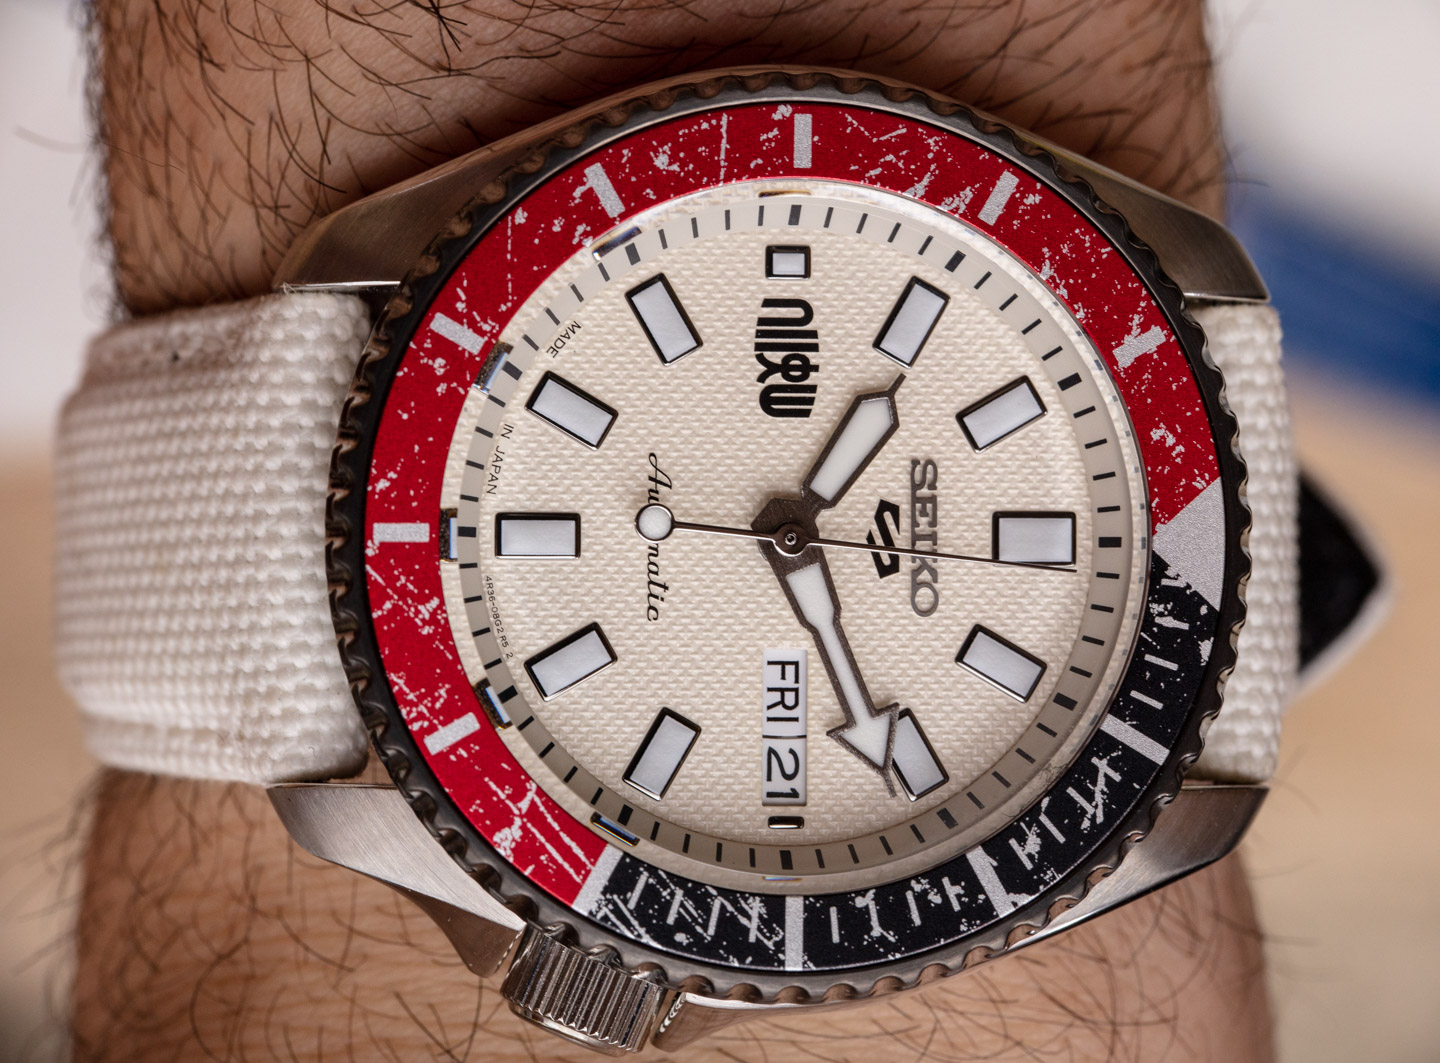 Hands-On: Seiko 5 Street Fighter Watches Hands-On 